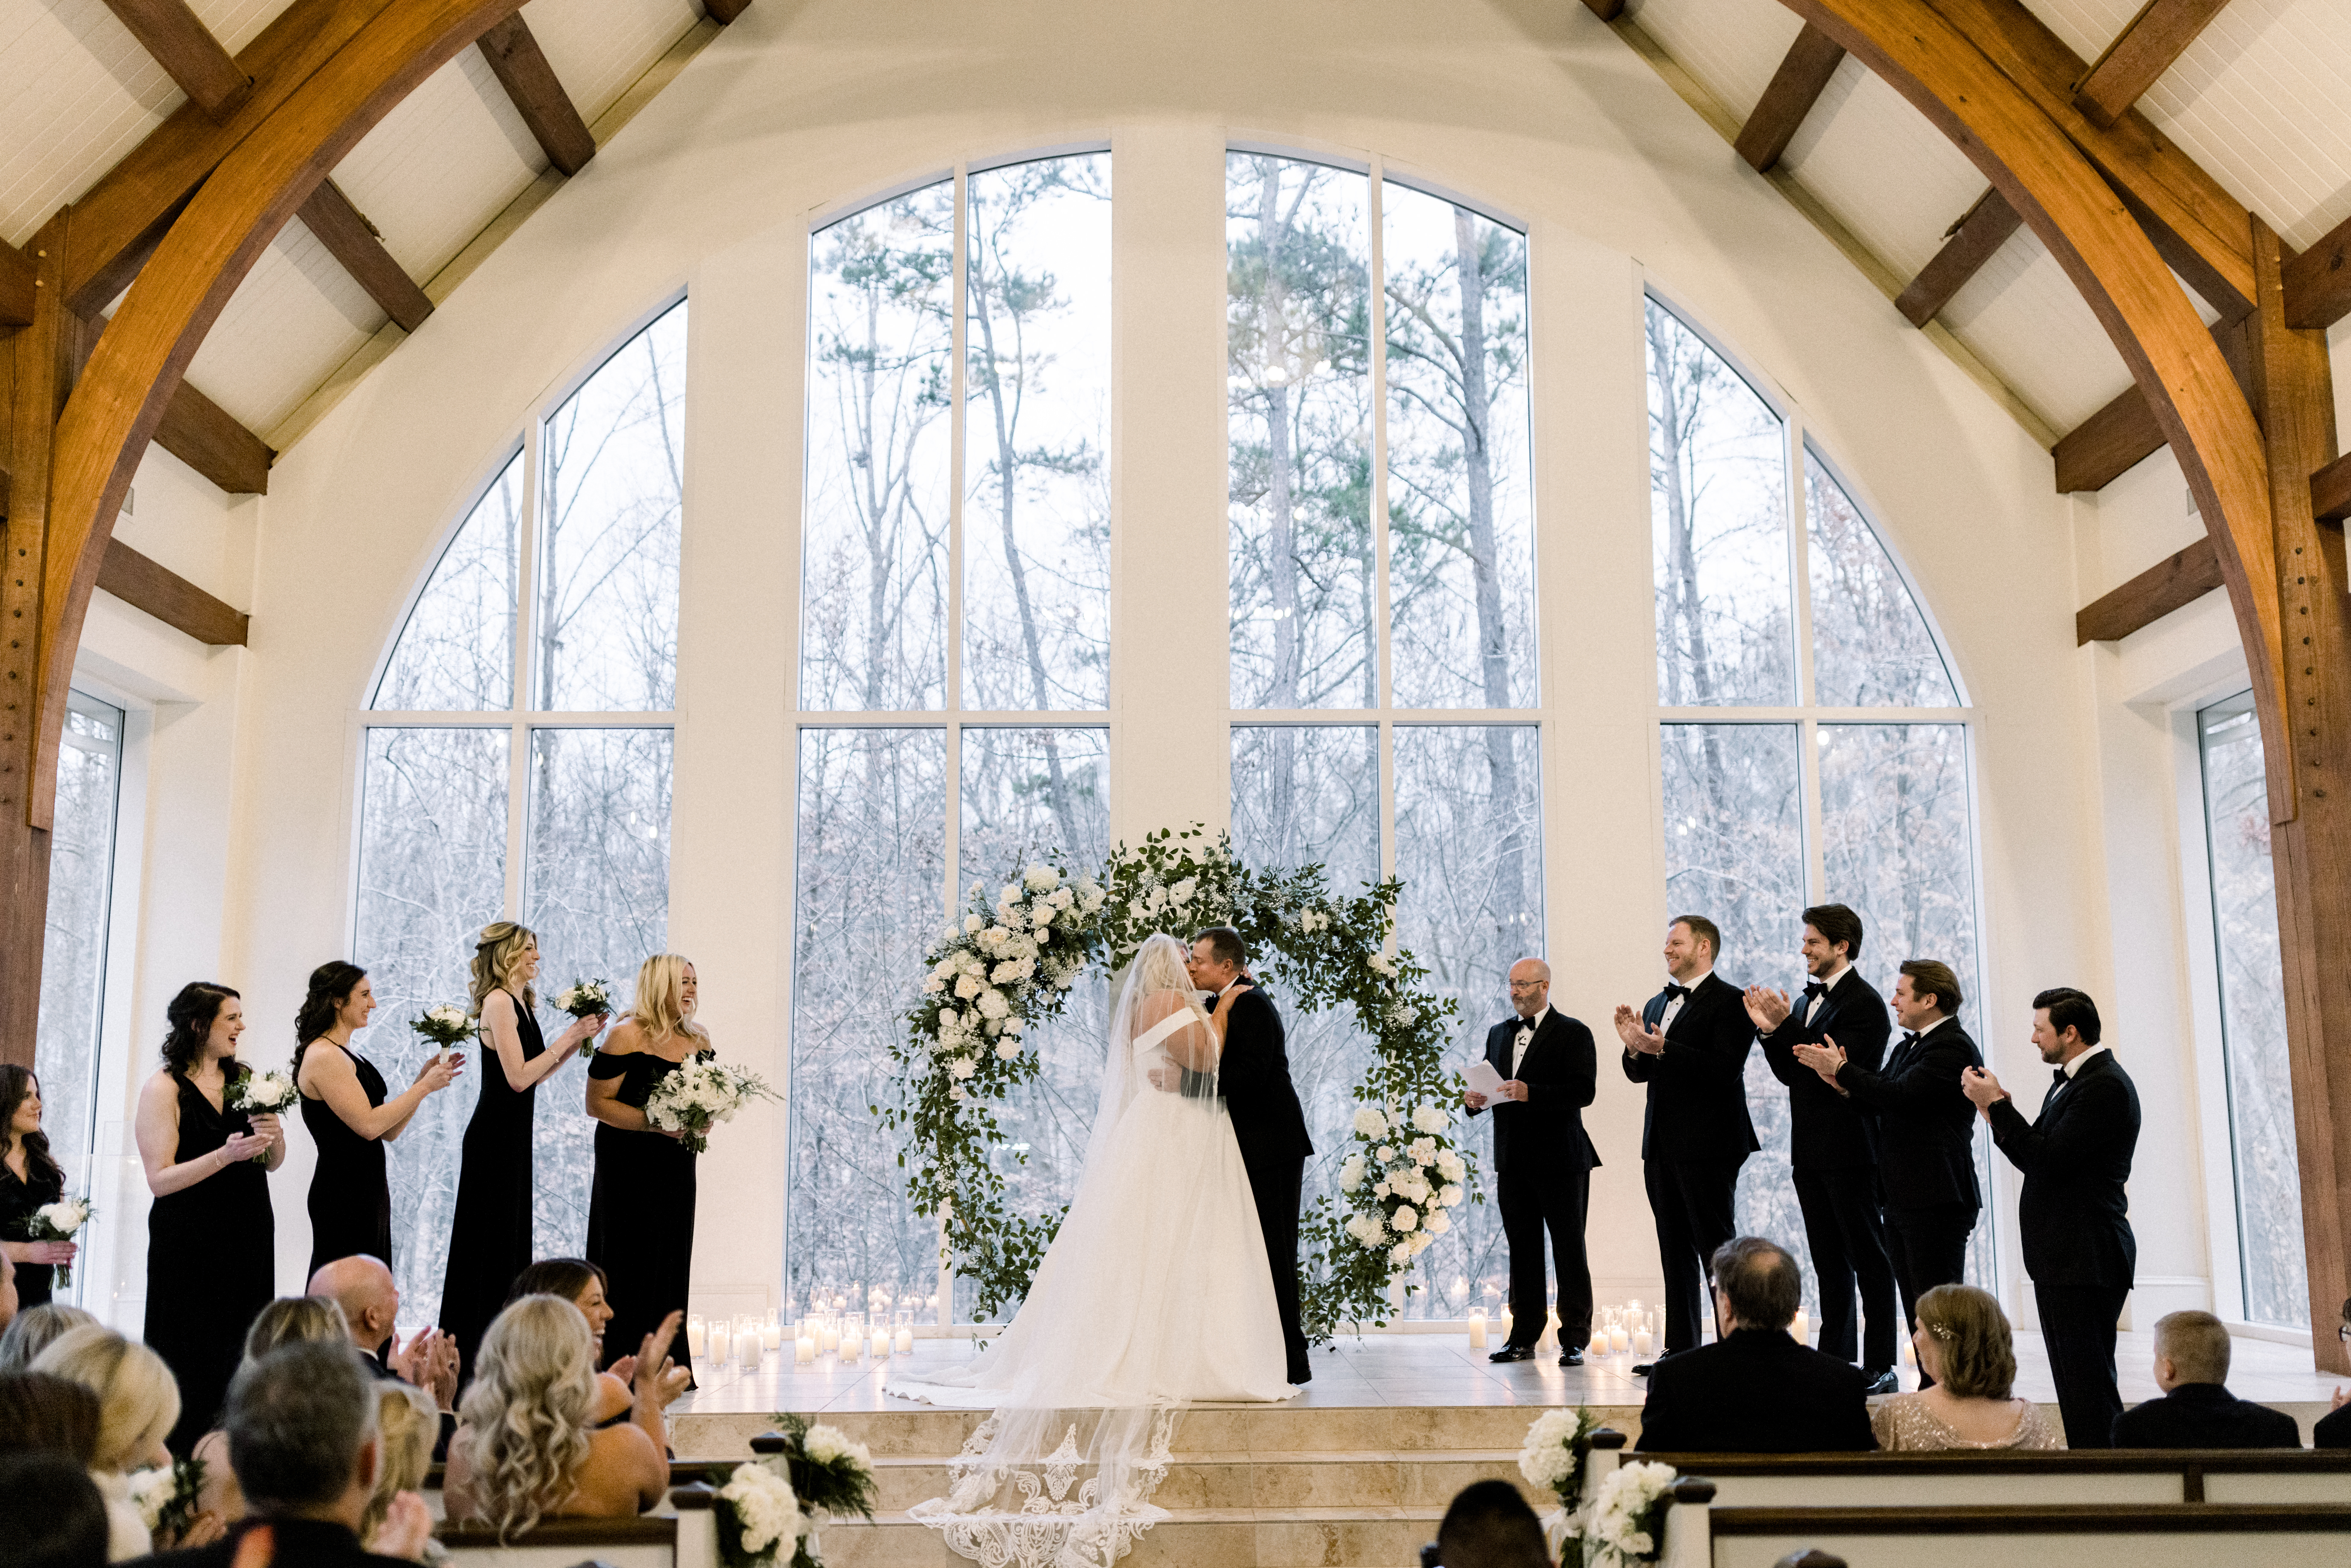 Bride and groom officially married with floral arch